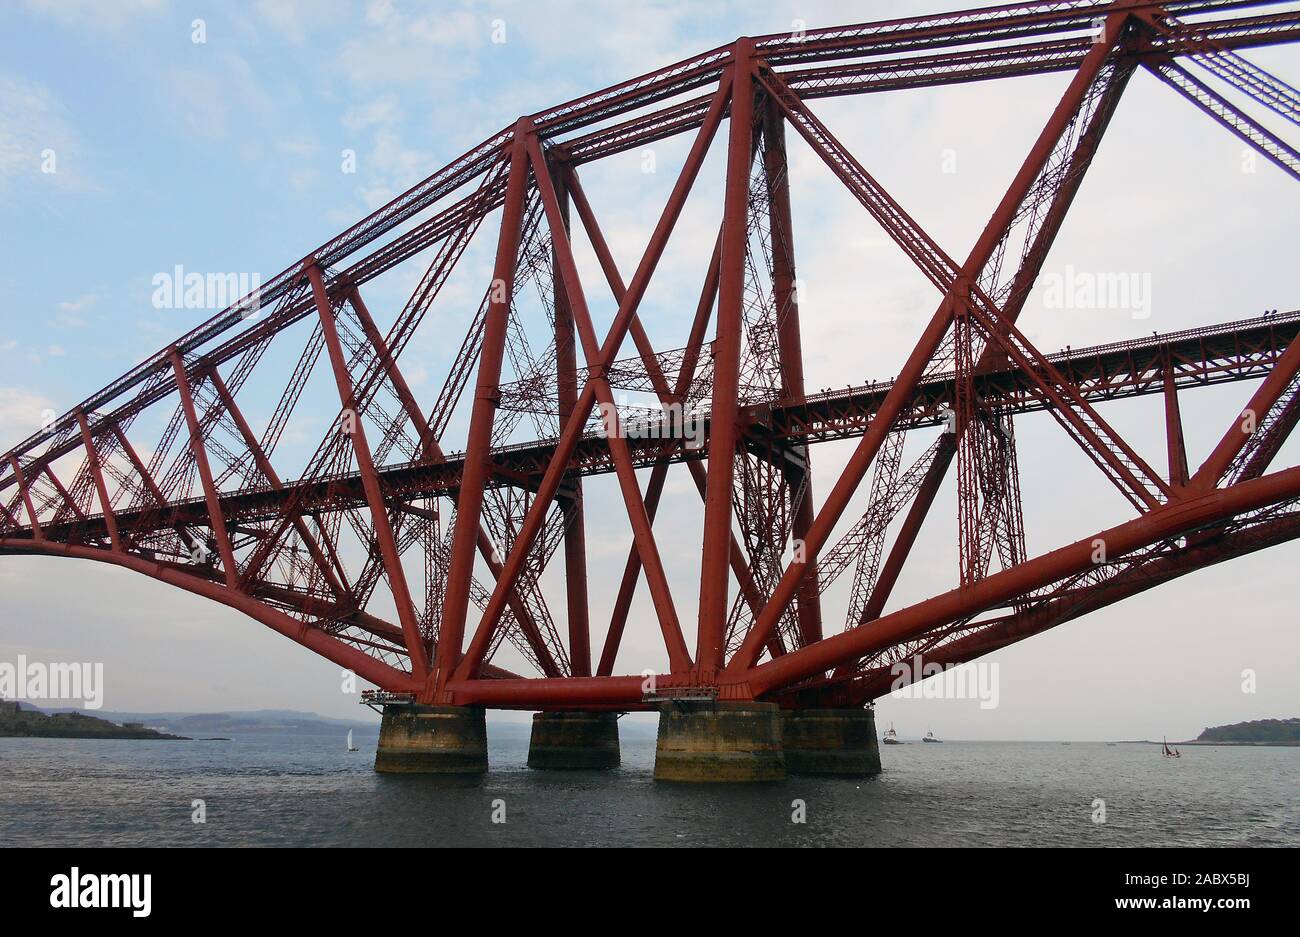 The central pier, of the 3 pier colossal, awesome and World Heritage Site railway bridge - The Forth Bridge in Scotland. Probably the most widely recognised bridge in the world, the Forth Bridge is an icon of design and engineering. It spans the Firth of Forth river on the east coast of Scotland near Edinburgh. Alan Wylie / ALAMY © Stock Photo